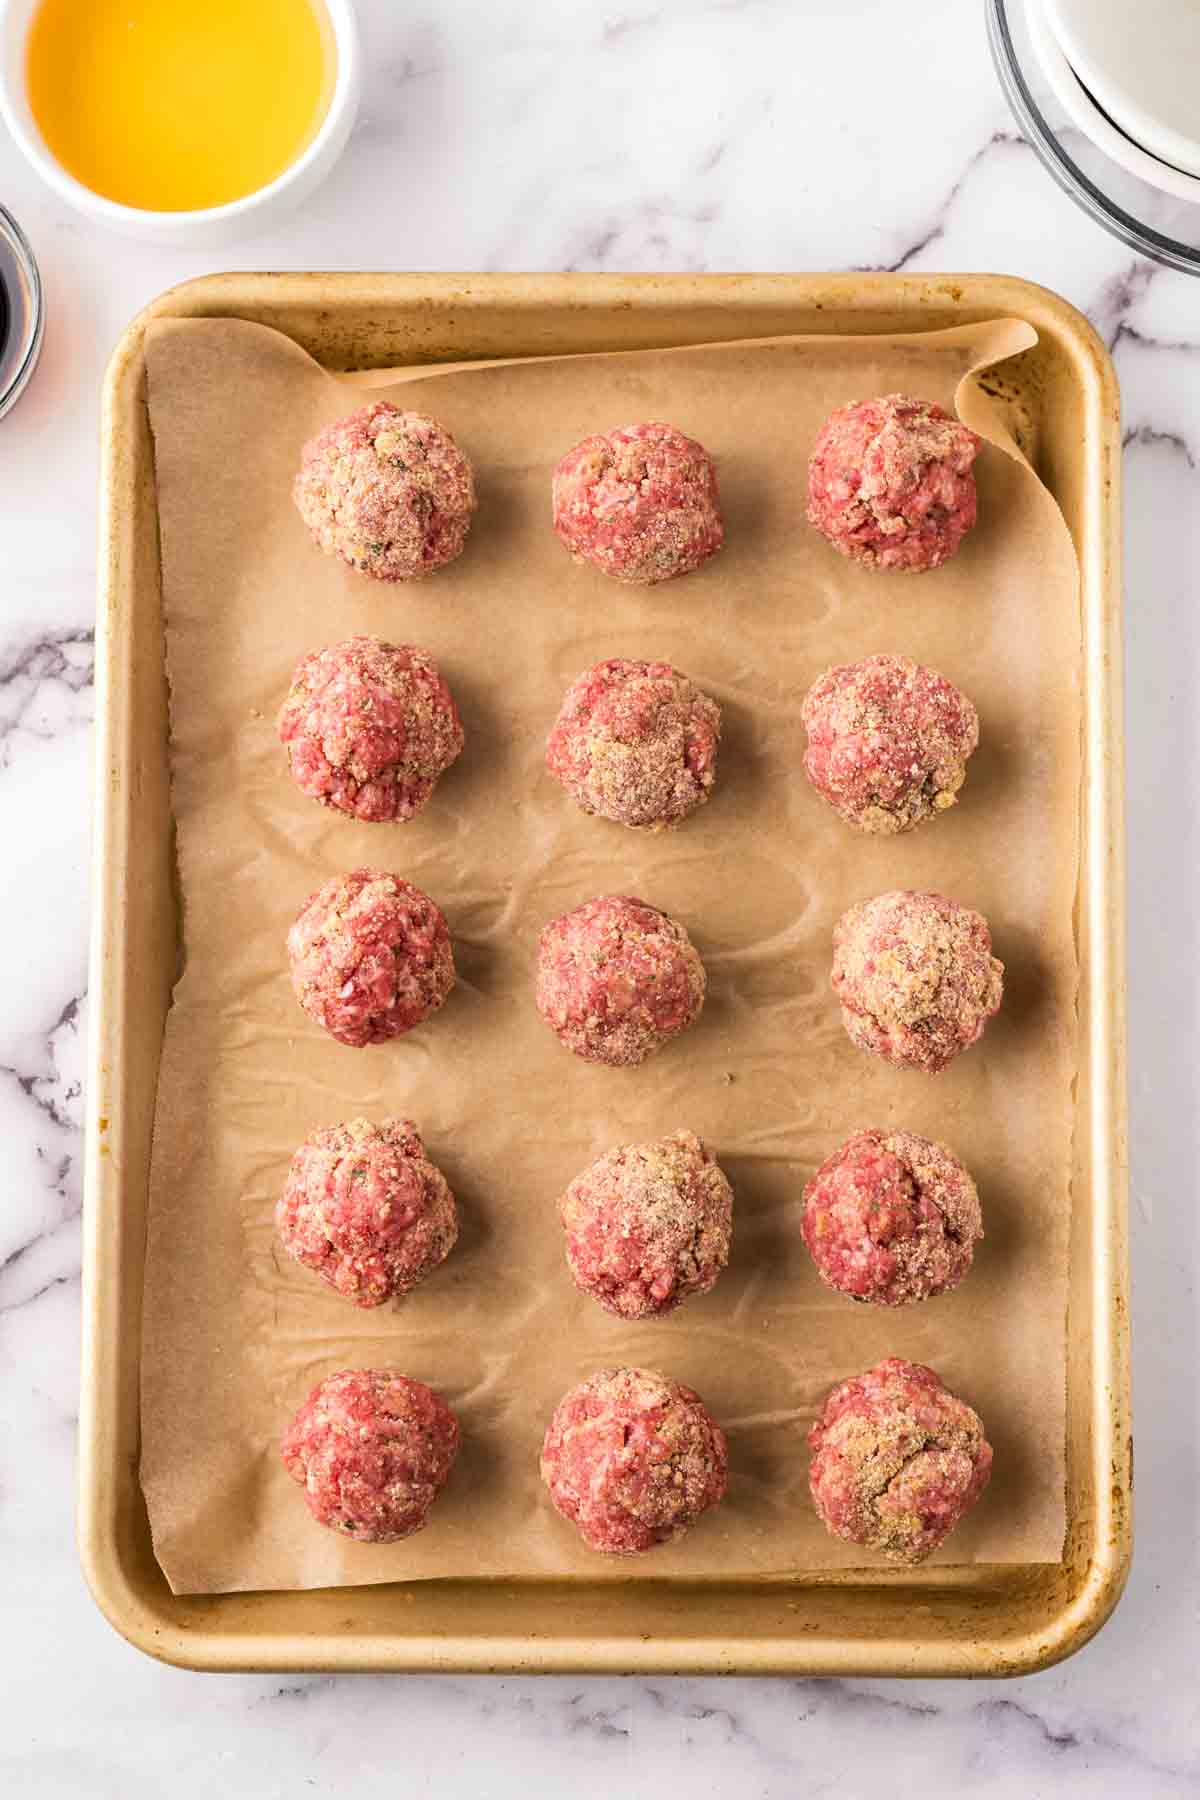 Baking sheet with raw round meatballs over parchment.